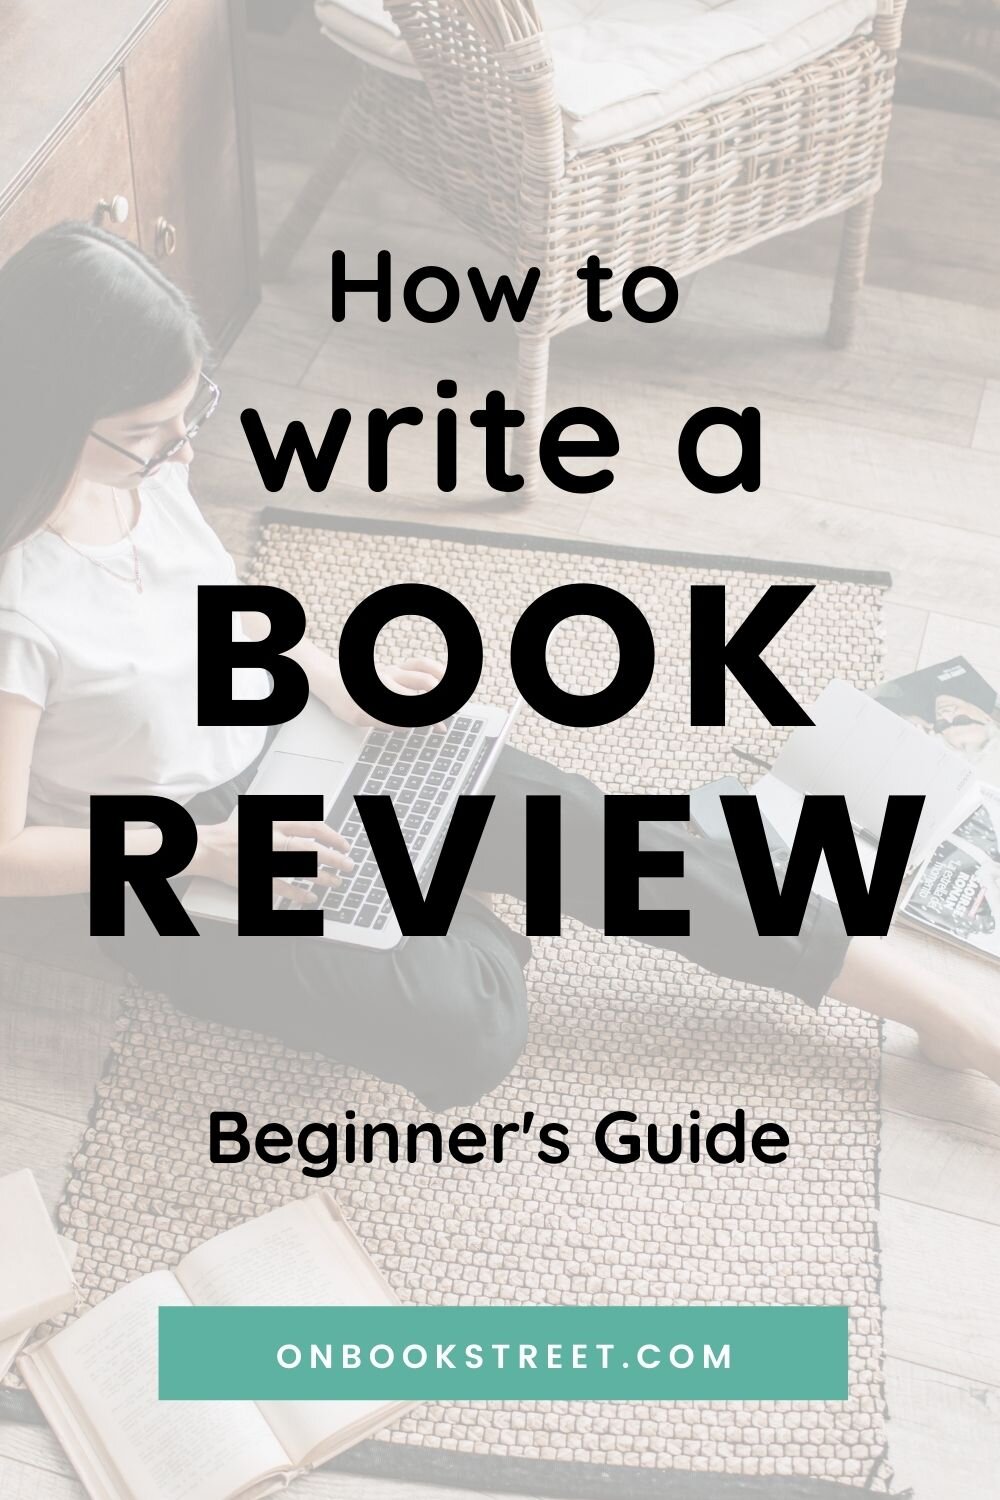 how to write a book review.jpg